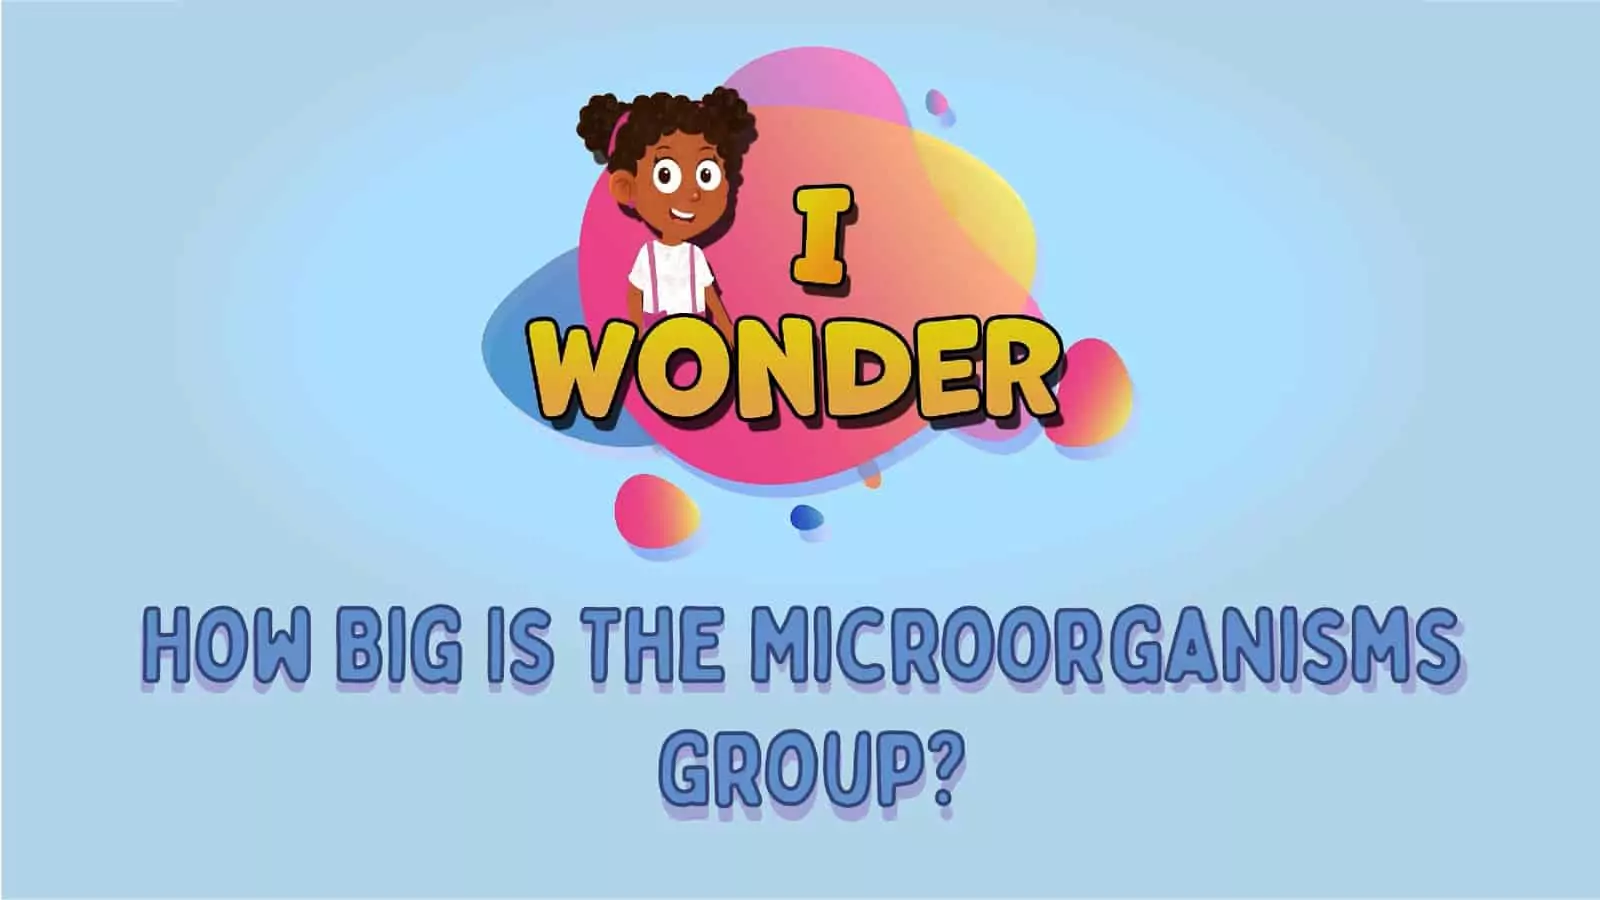 How Big Is The Microorganisms Group?